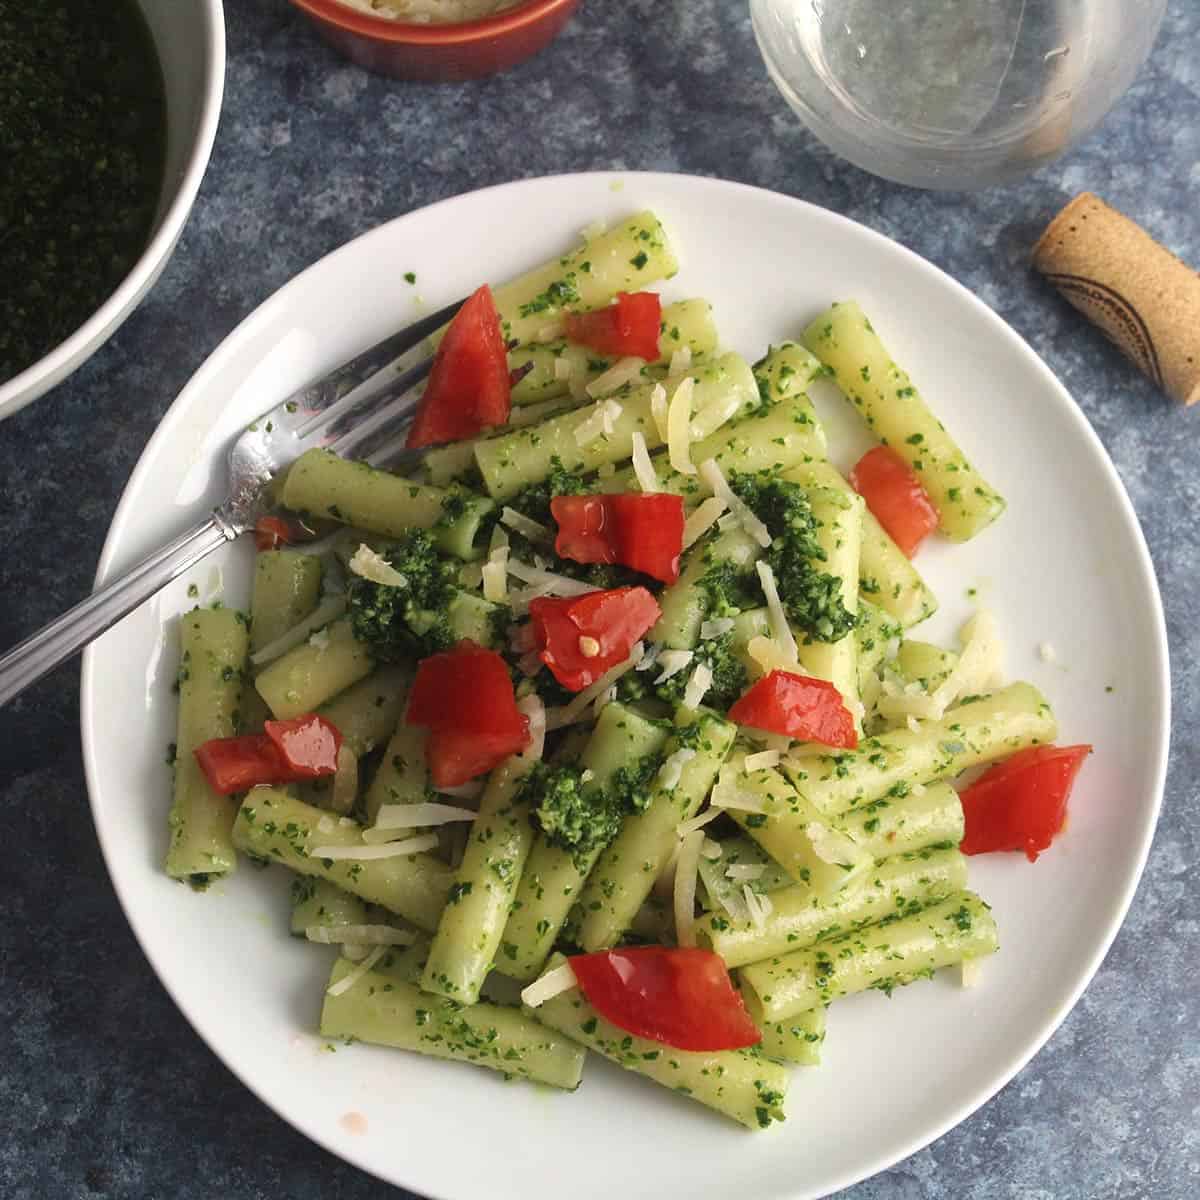 ziti tossed with kale pesto and topped with tomatoes. served on a while plate with a fork.